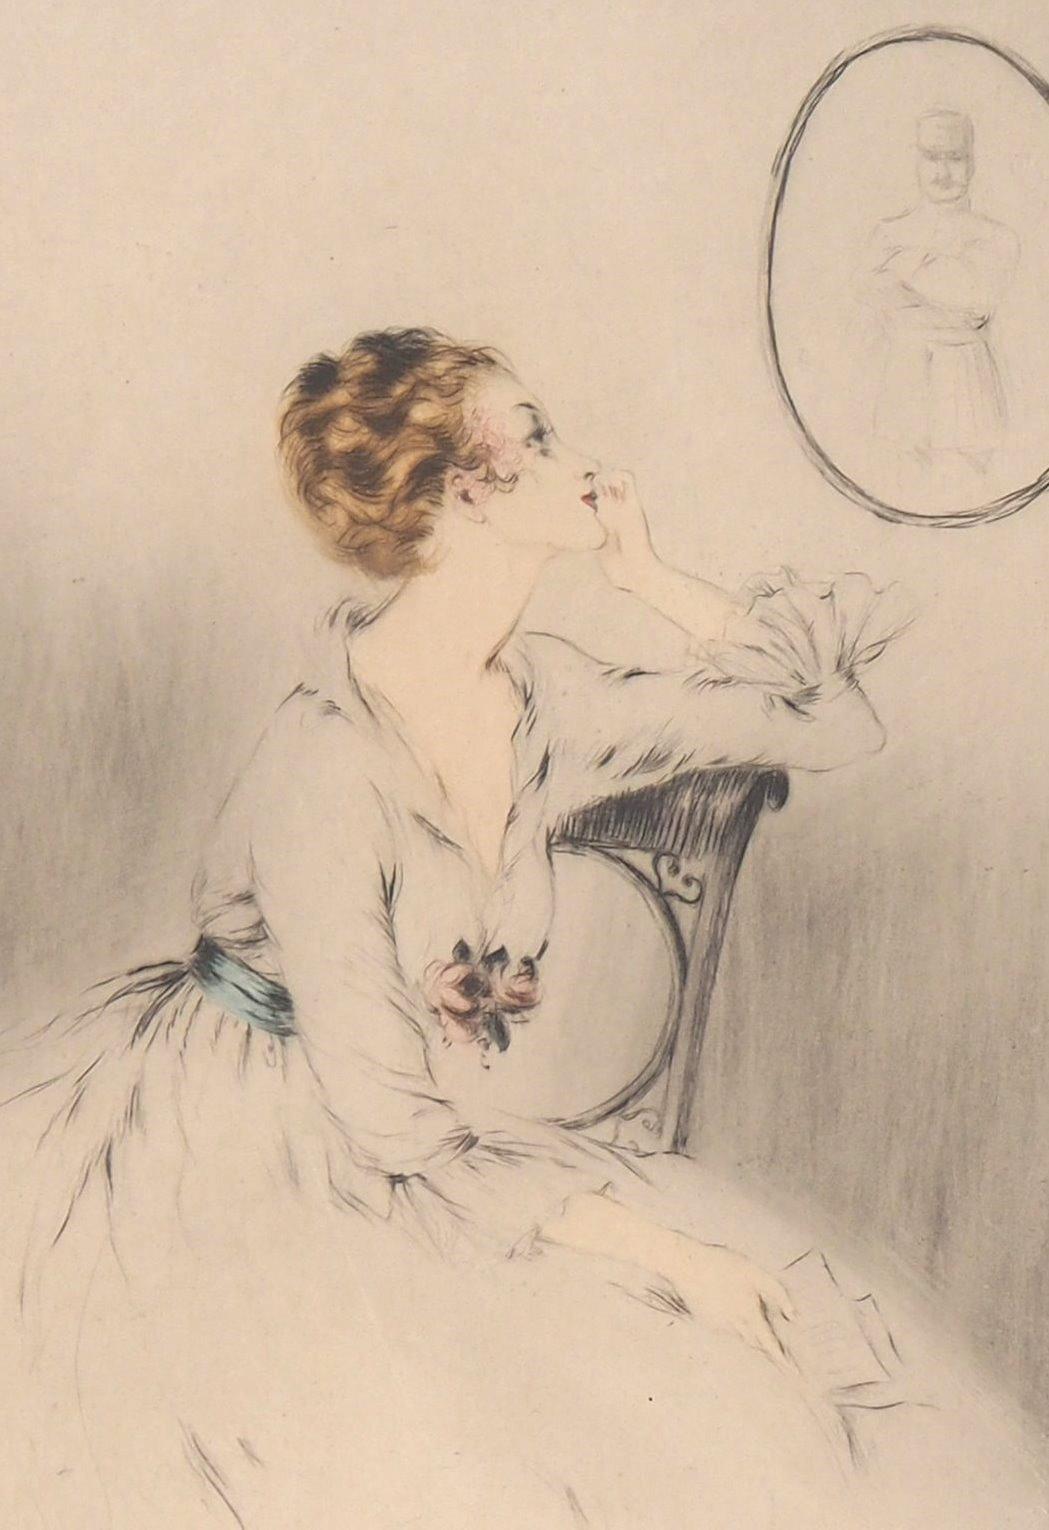 Wife Waiting for Her Husband - Original Handsigned Etching & Watercolor - Beige Figurative Print by Louis Icart